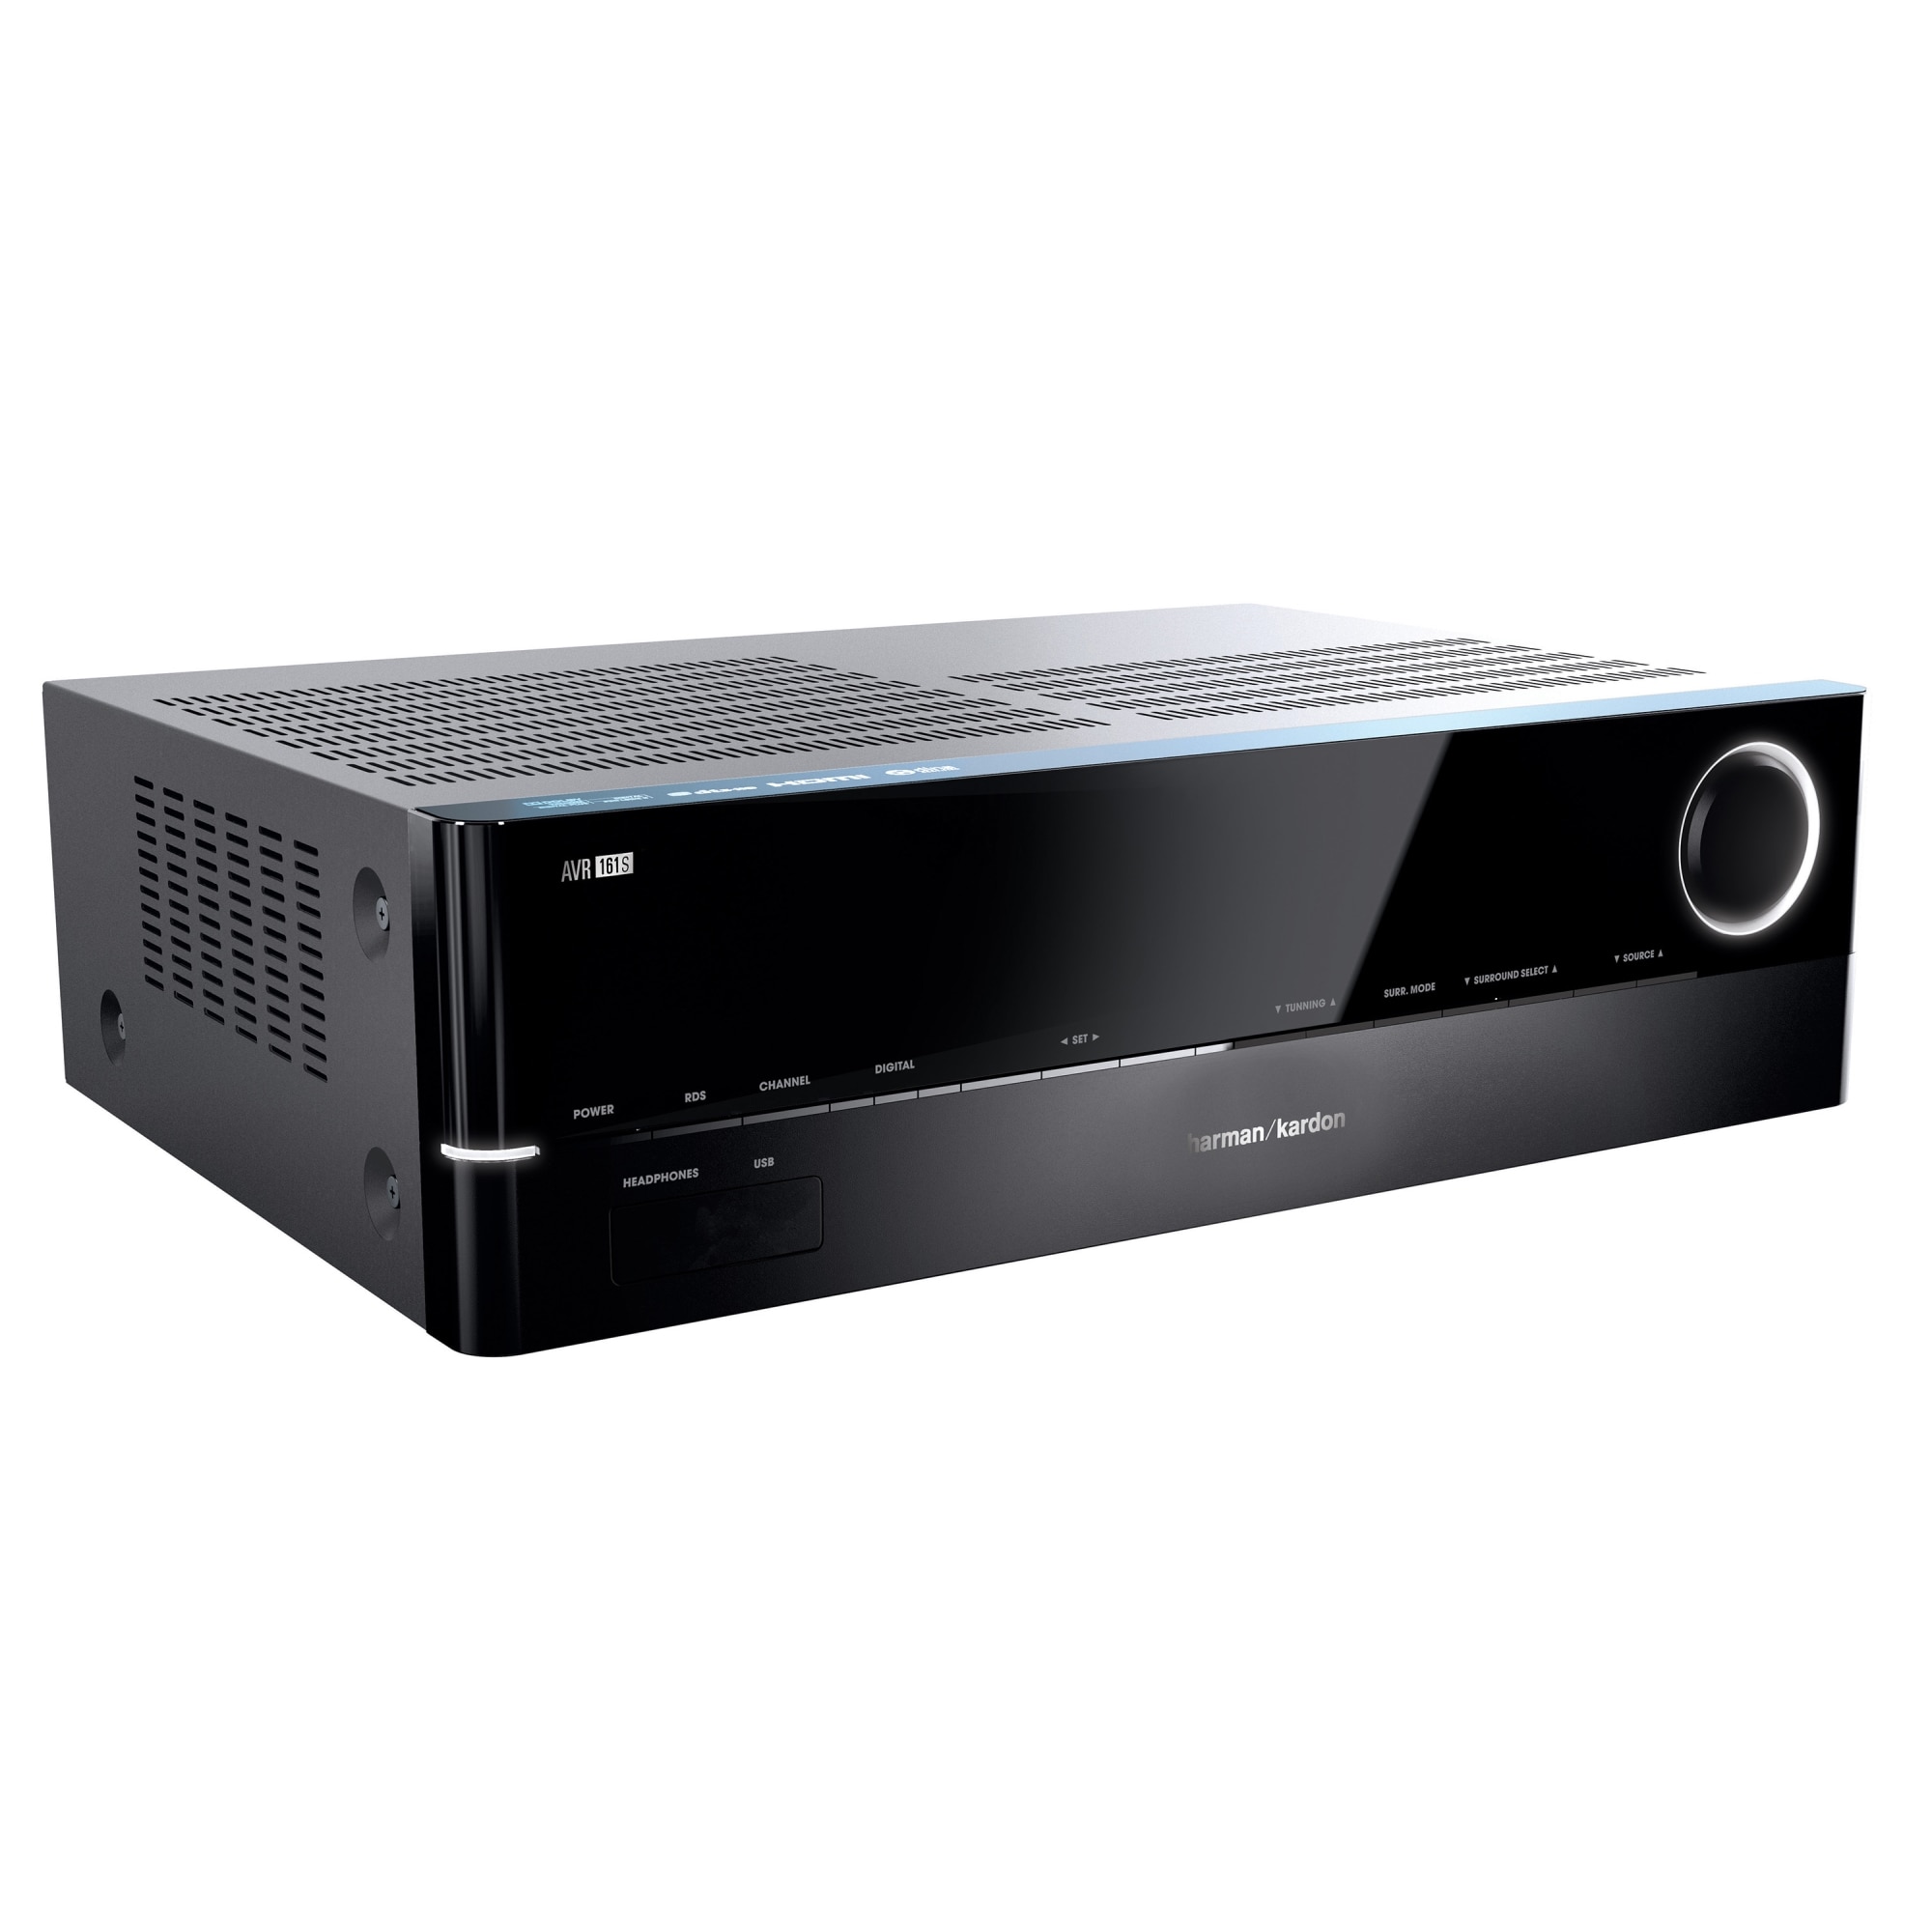 famine Prompt moron Receiver Harman Kardon AVR 161S, 5.1 canale, 425W RMS, Negru - eMAG.ro